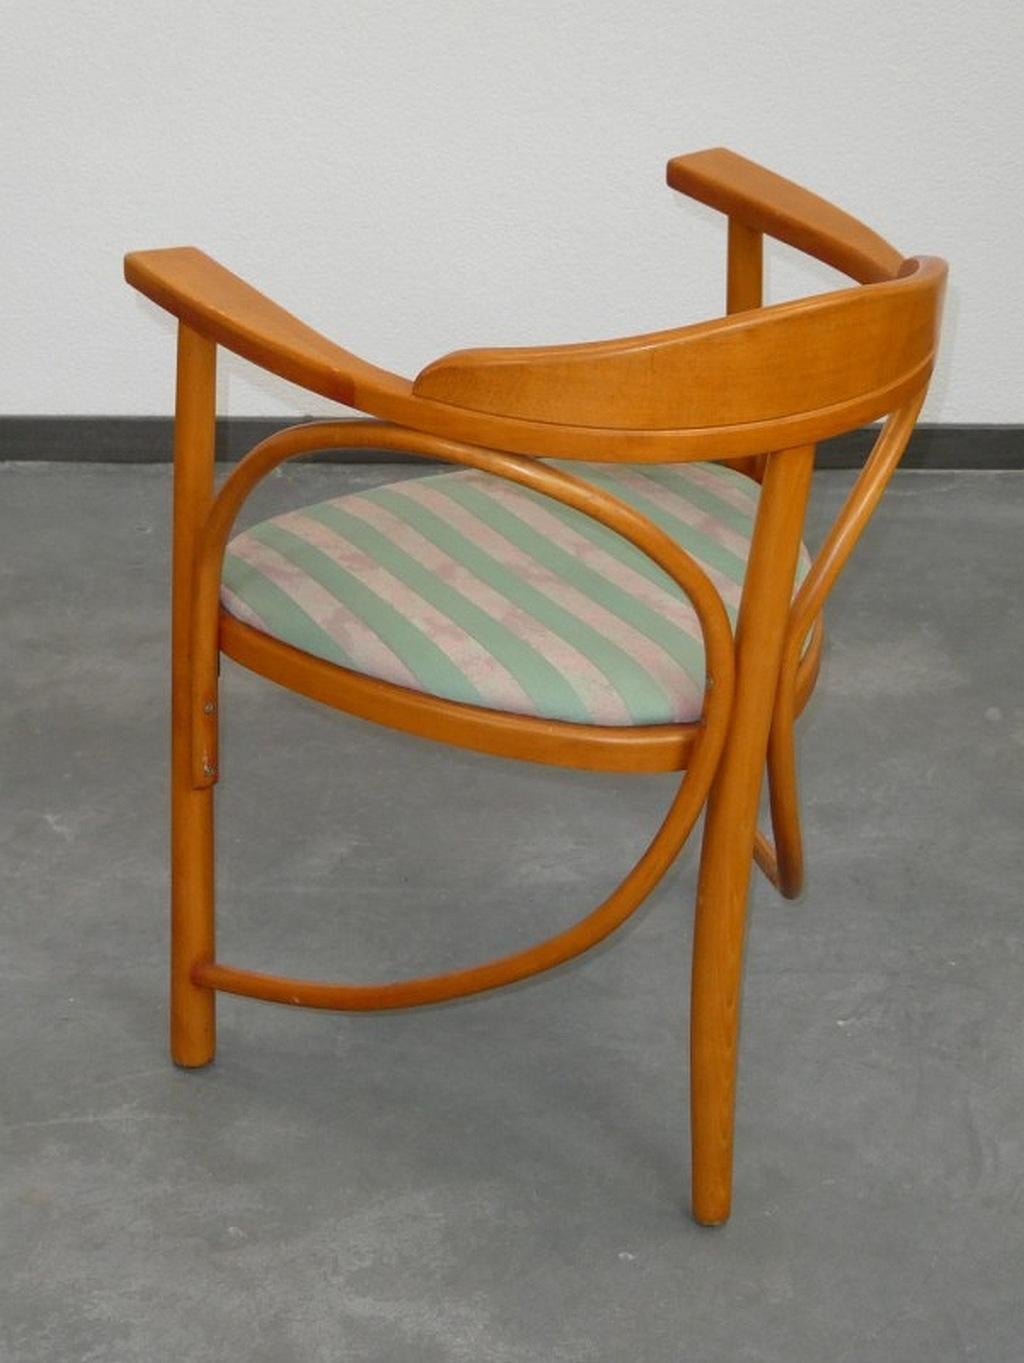 Dining chairs no.81 by Thonet Debrecsen executed in 1980s. Excellent original condition.